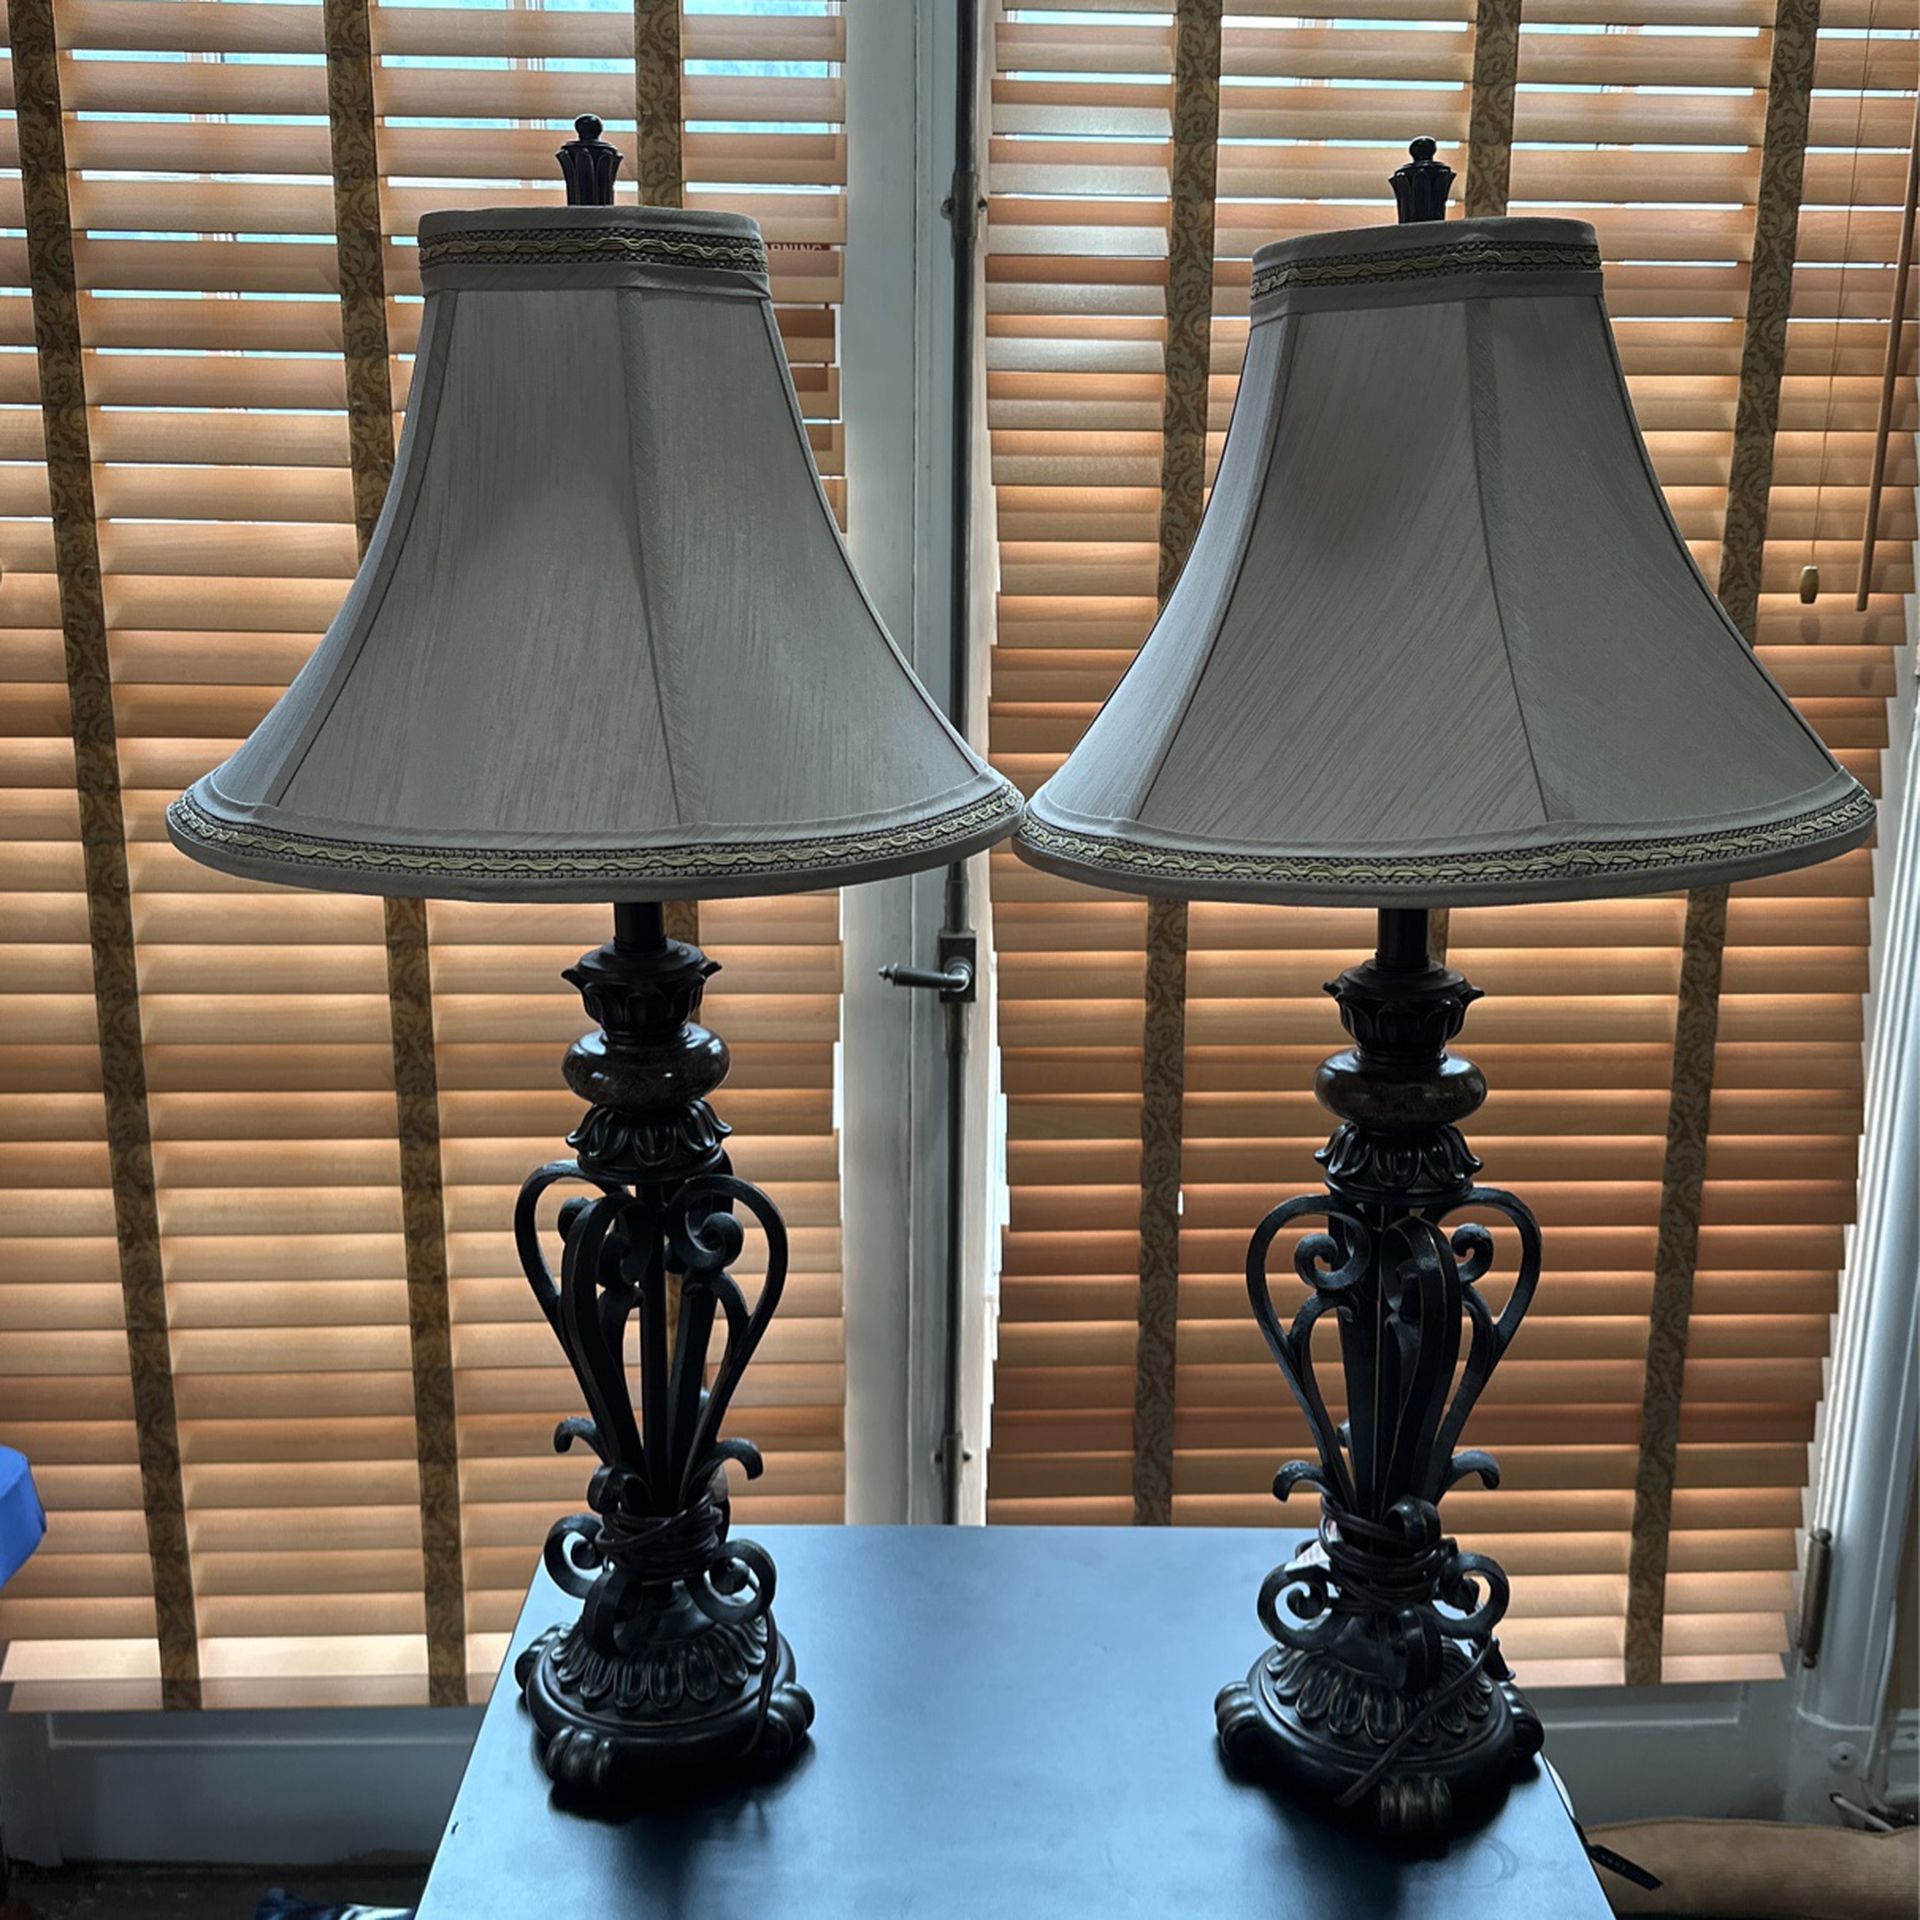 Antique Brass Metal Table Lamps $30 Each